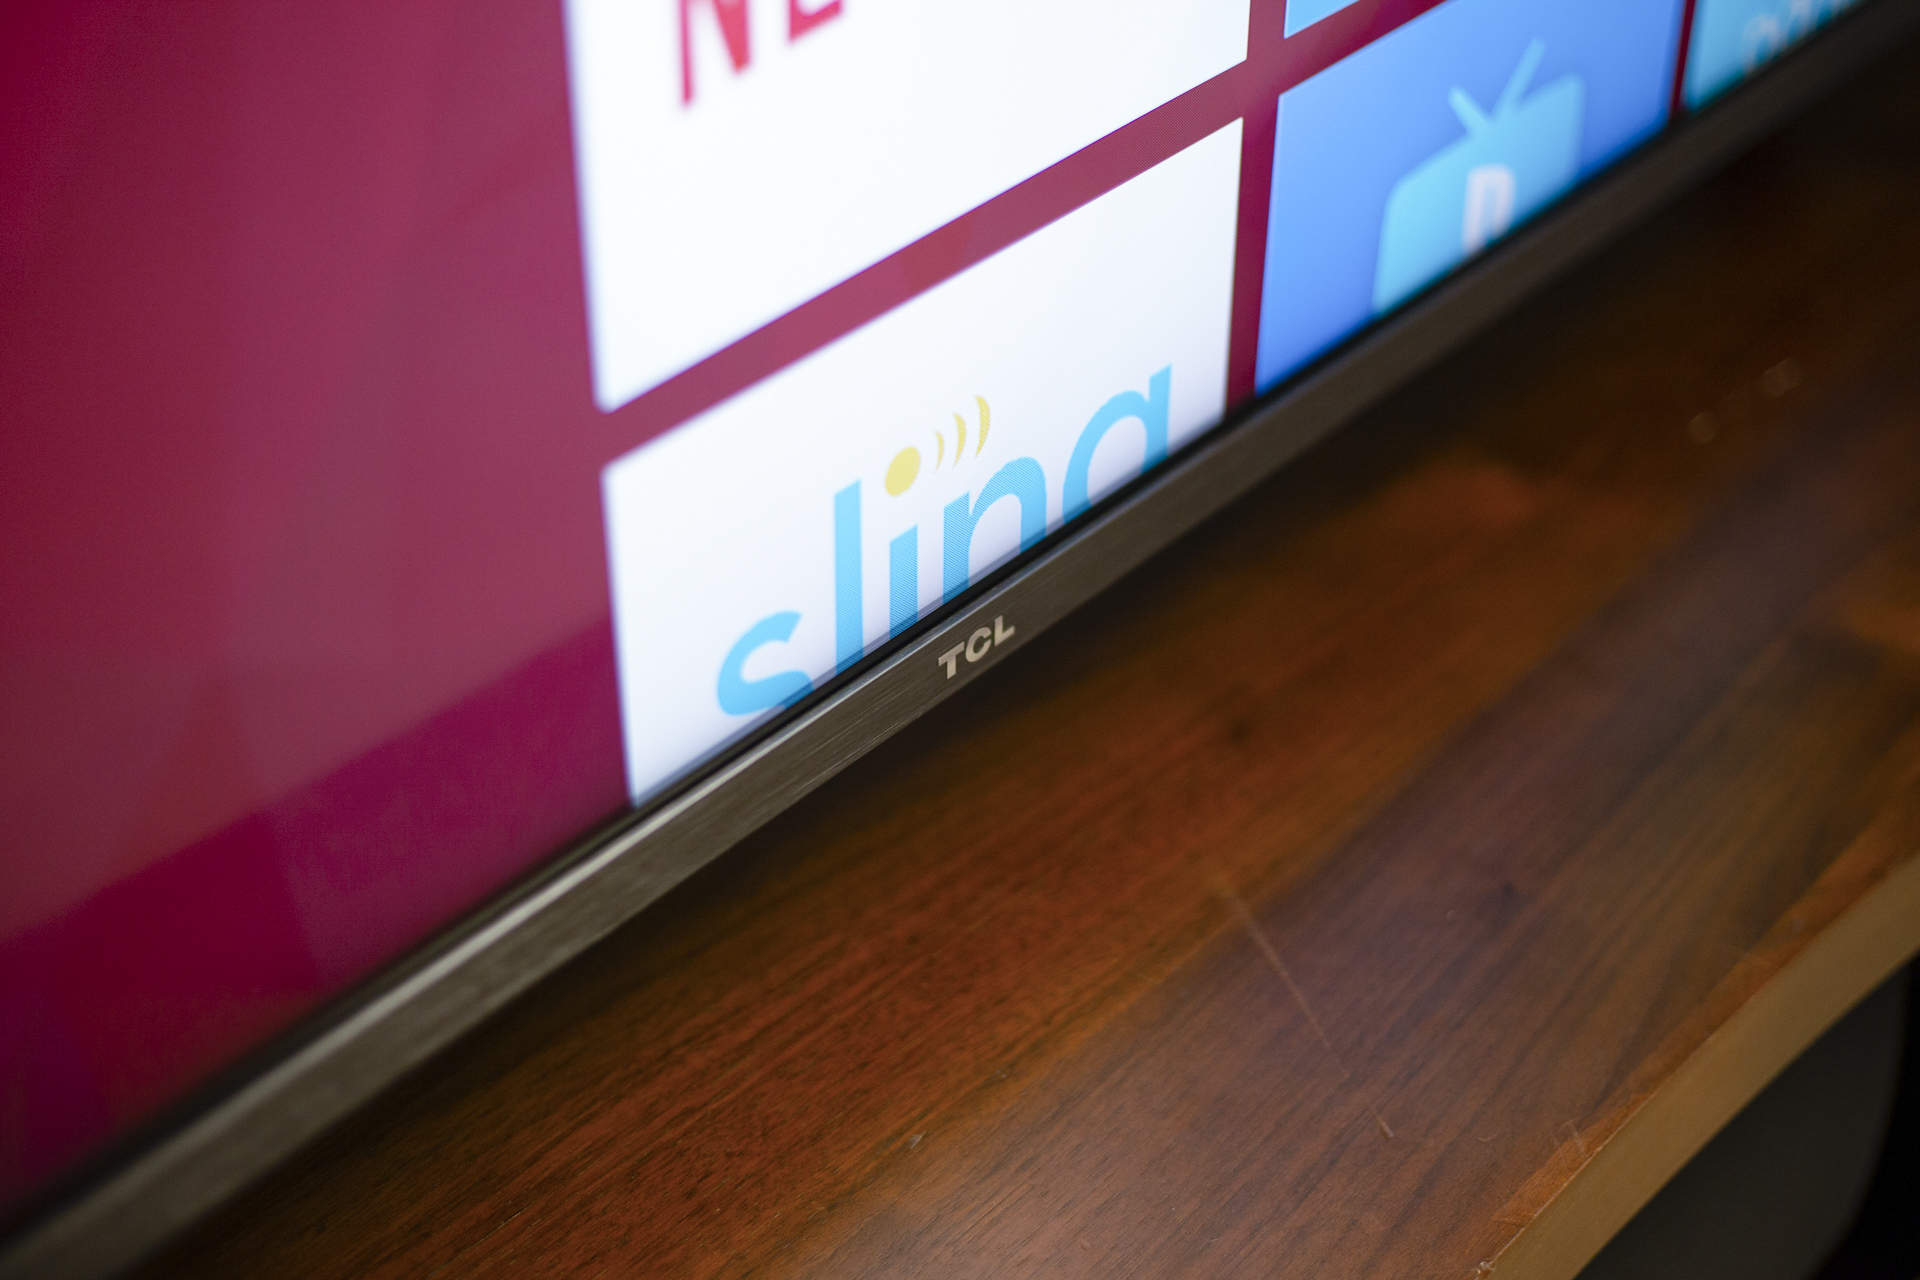 TCL 6 Series 65-inch Roku TV (65R617) - Full Review and Benchmarks